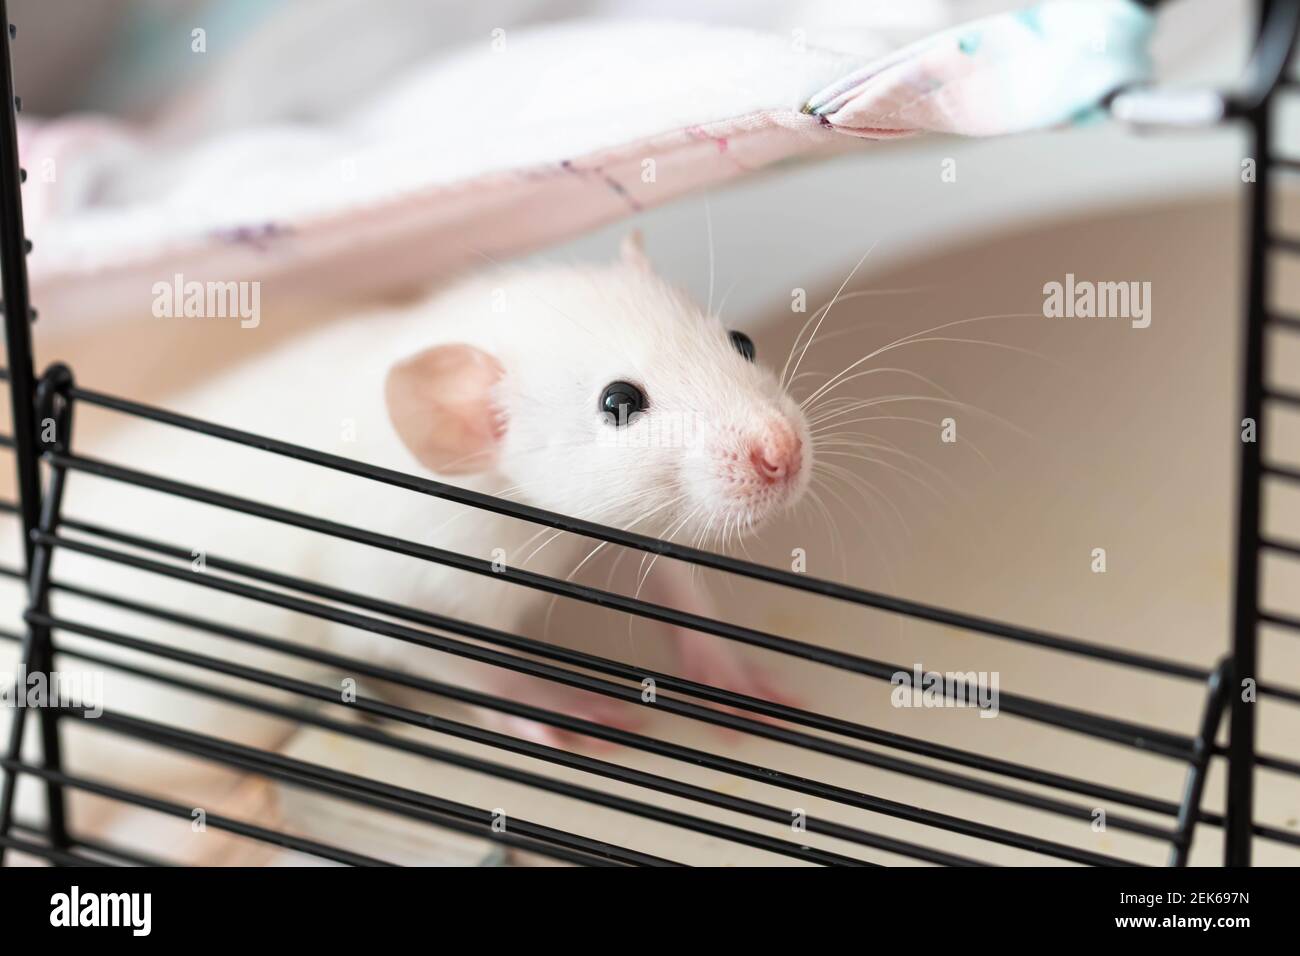 Rat close-up. macro photography. A cute little face with a pink nose and long mustache peeks out of the cage Stock Photo